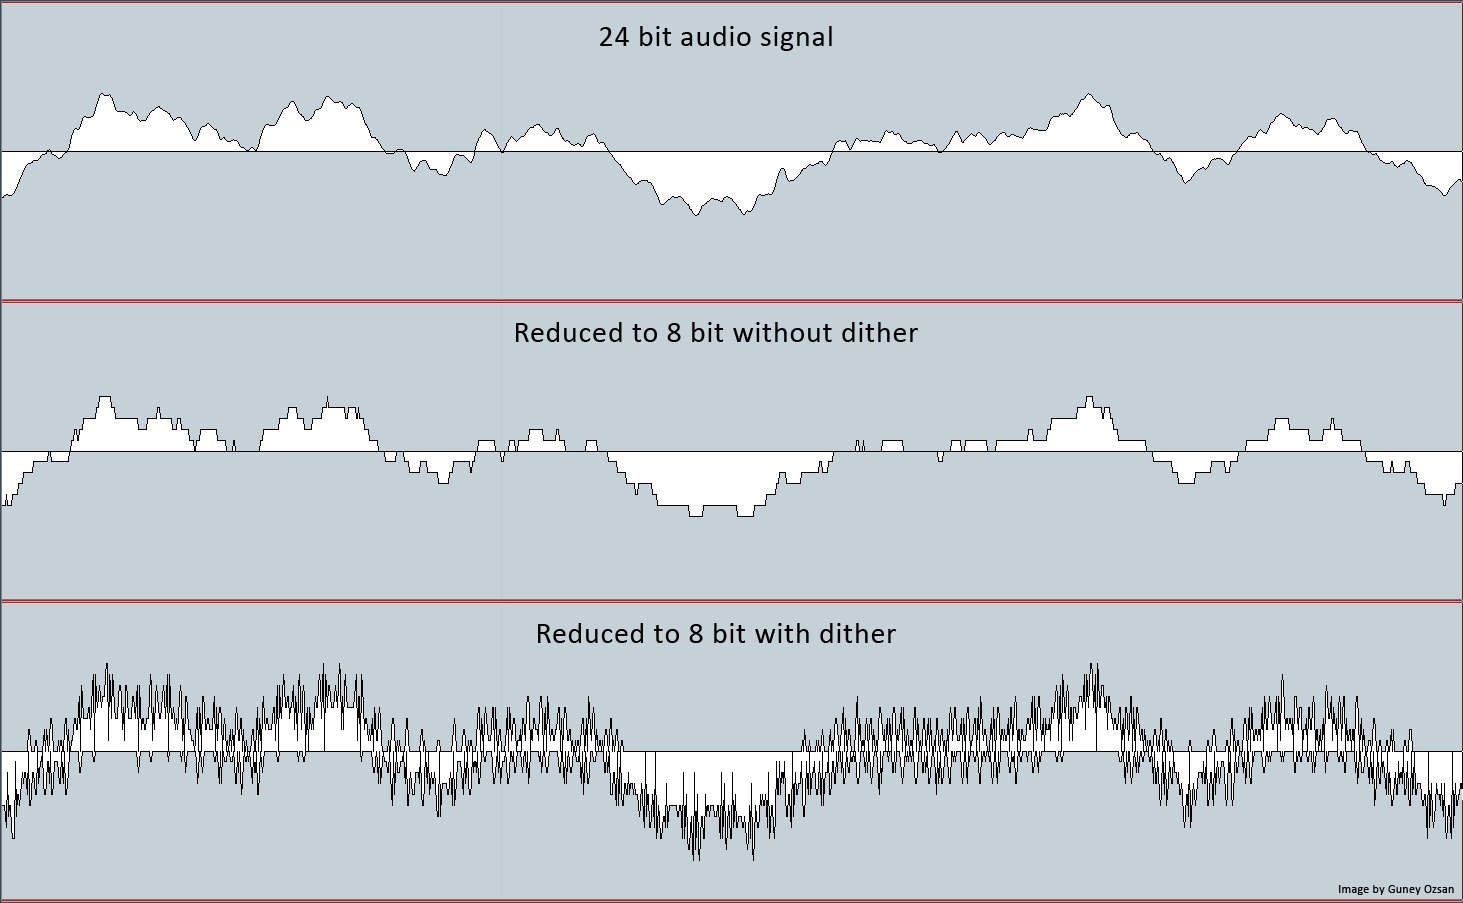 Audio bit reduction from 24-bit to 8-bit with and without dithering